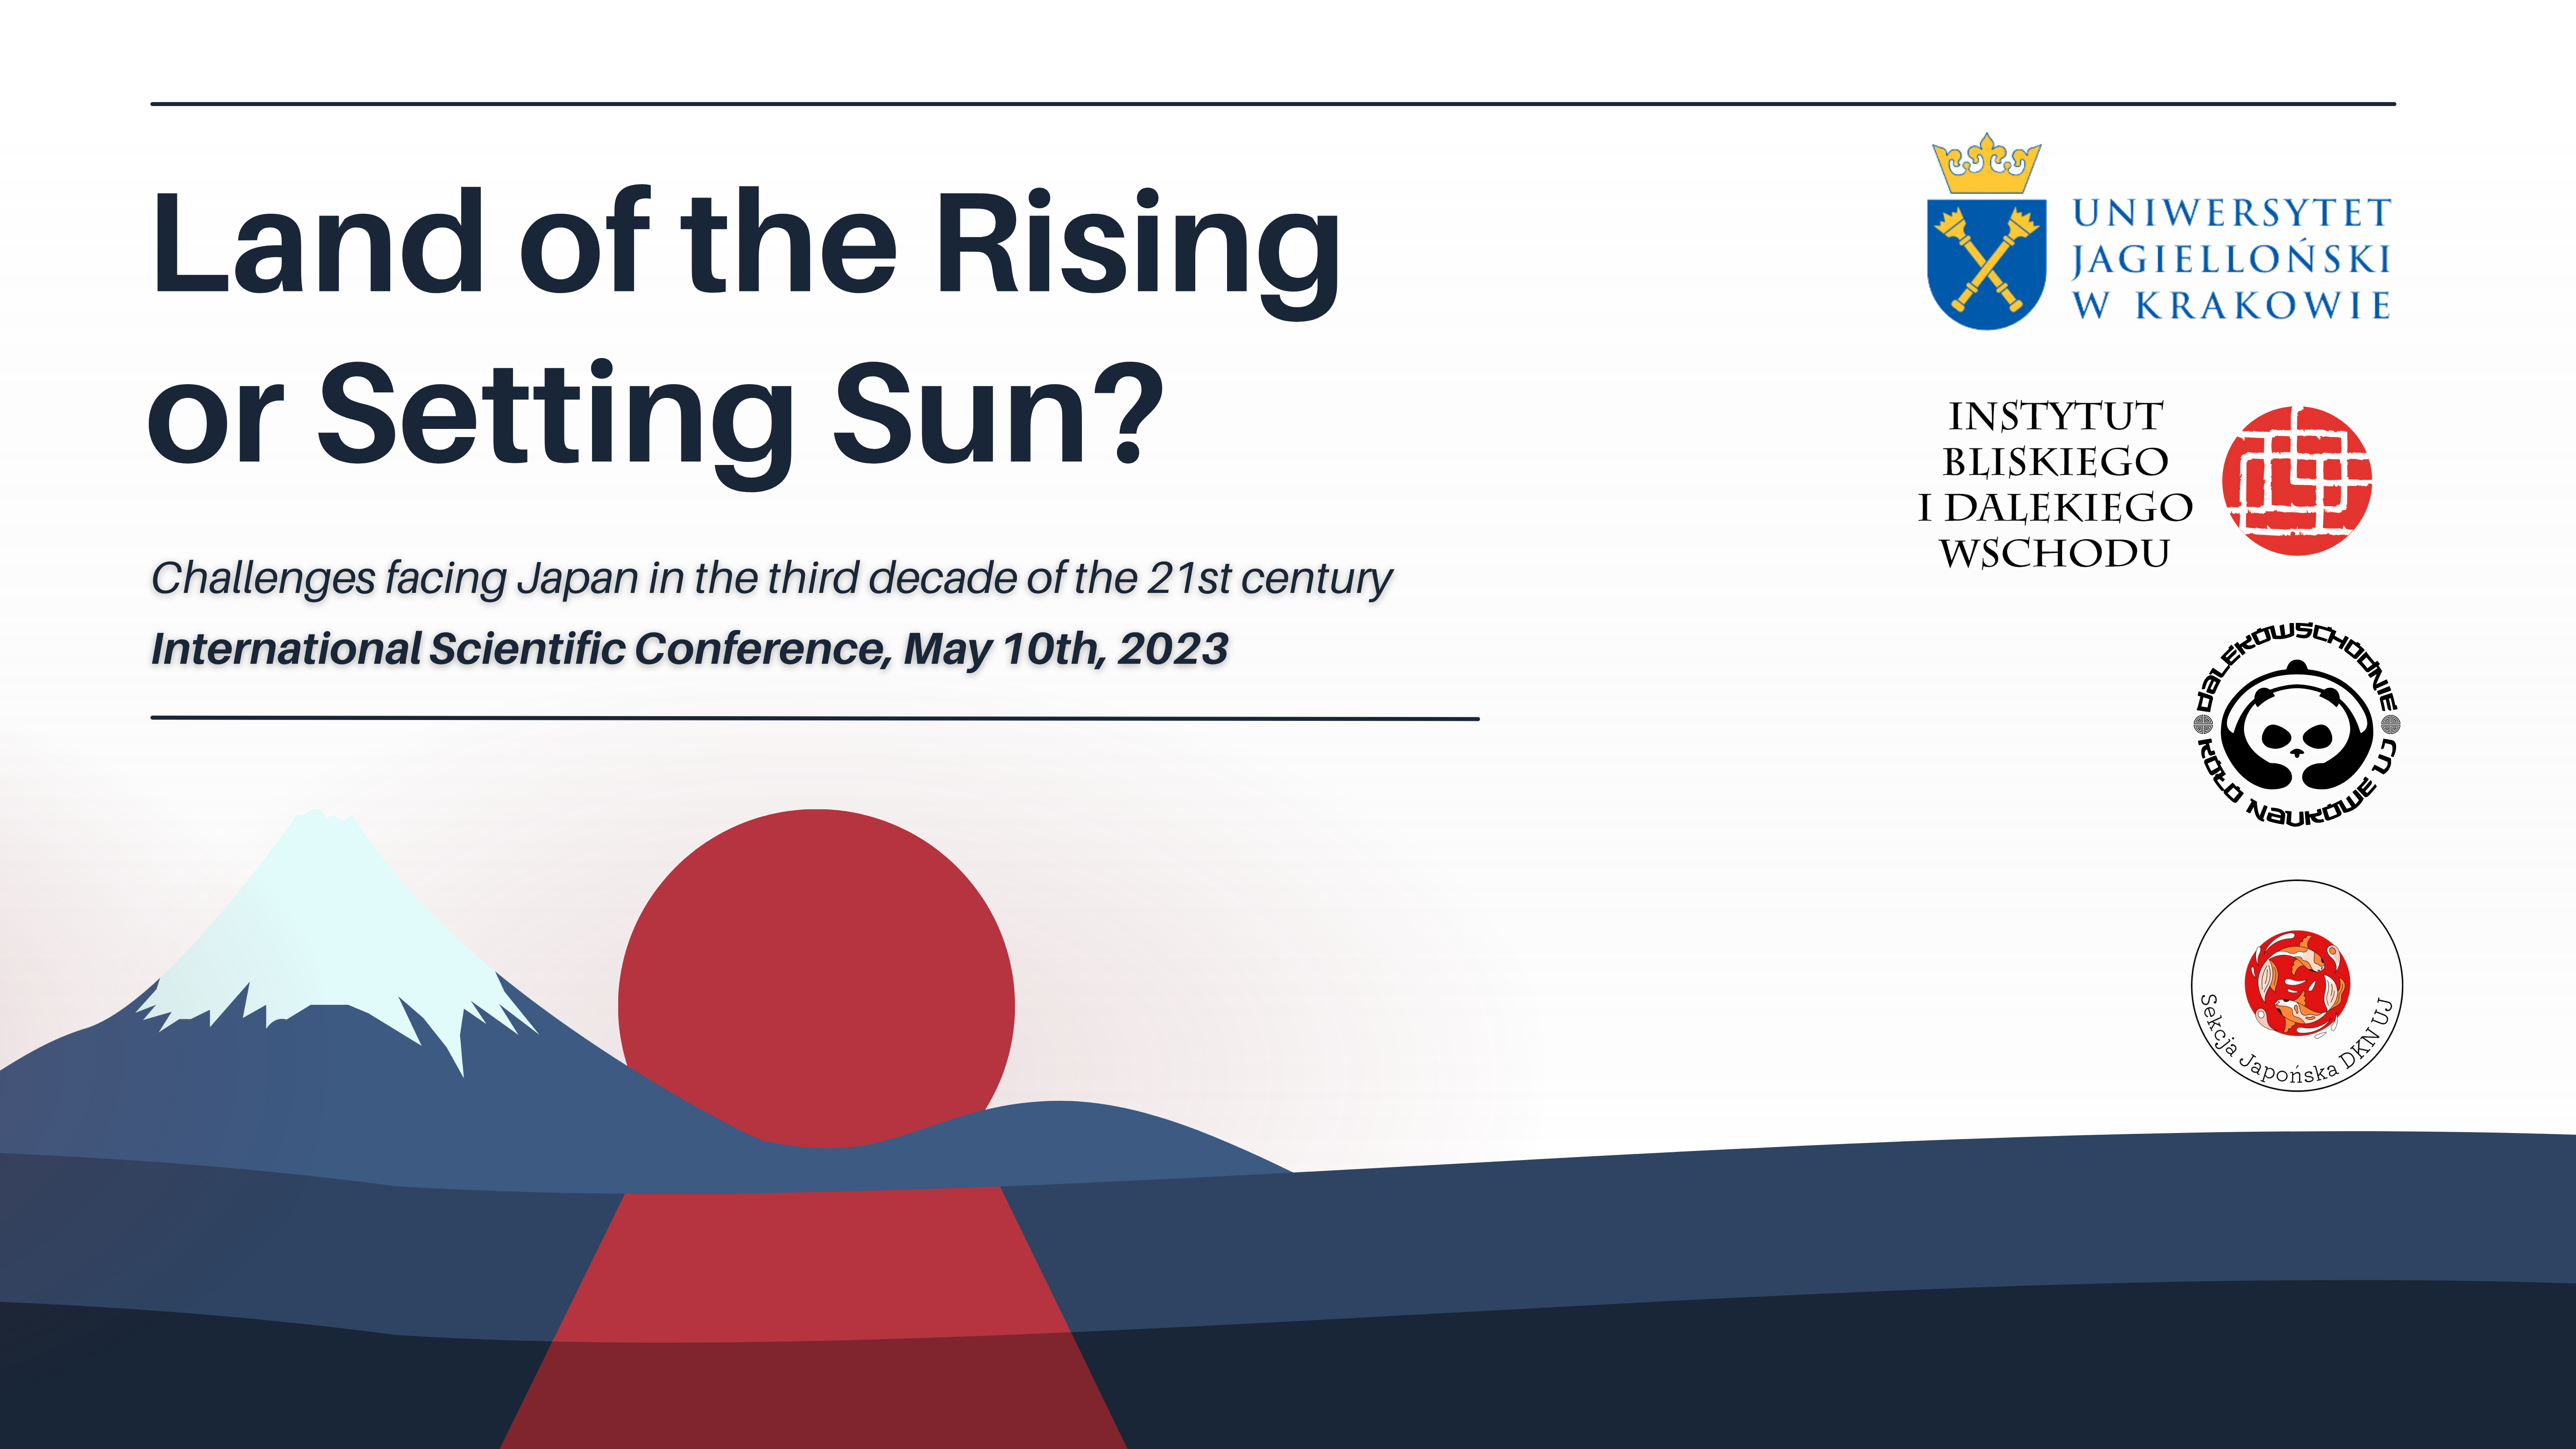 "Land of the Rising or Setting Sun? – challenges facing Japan in the third decade of the 21st century"